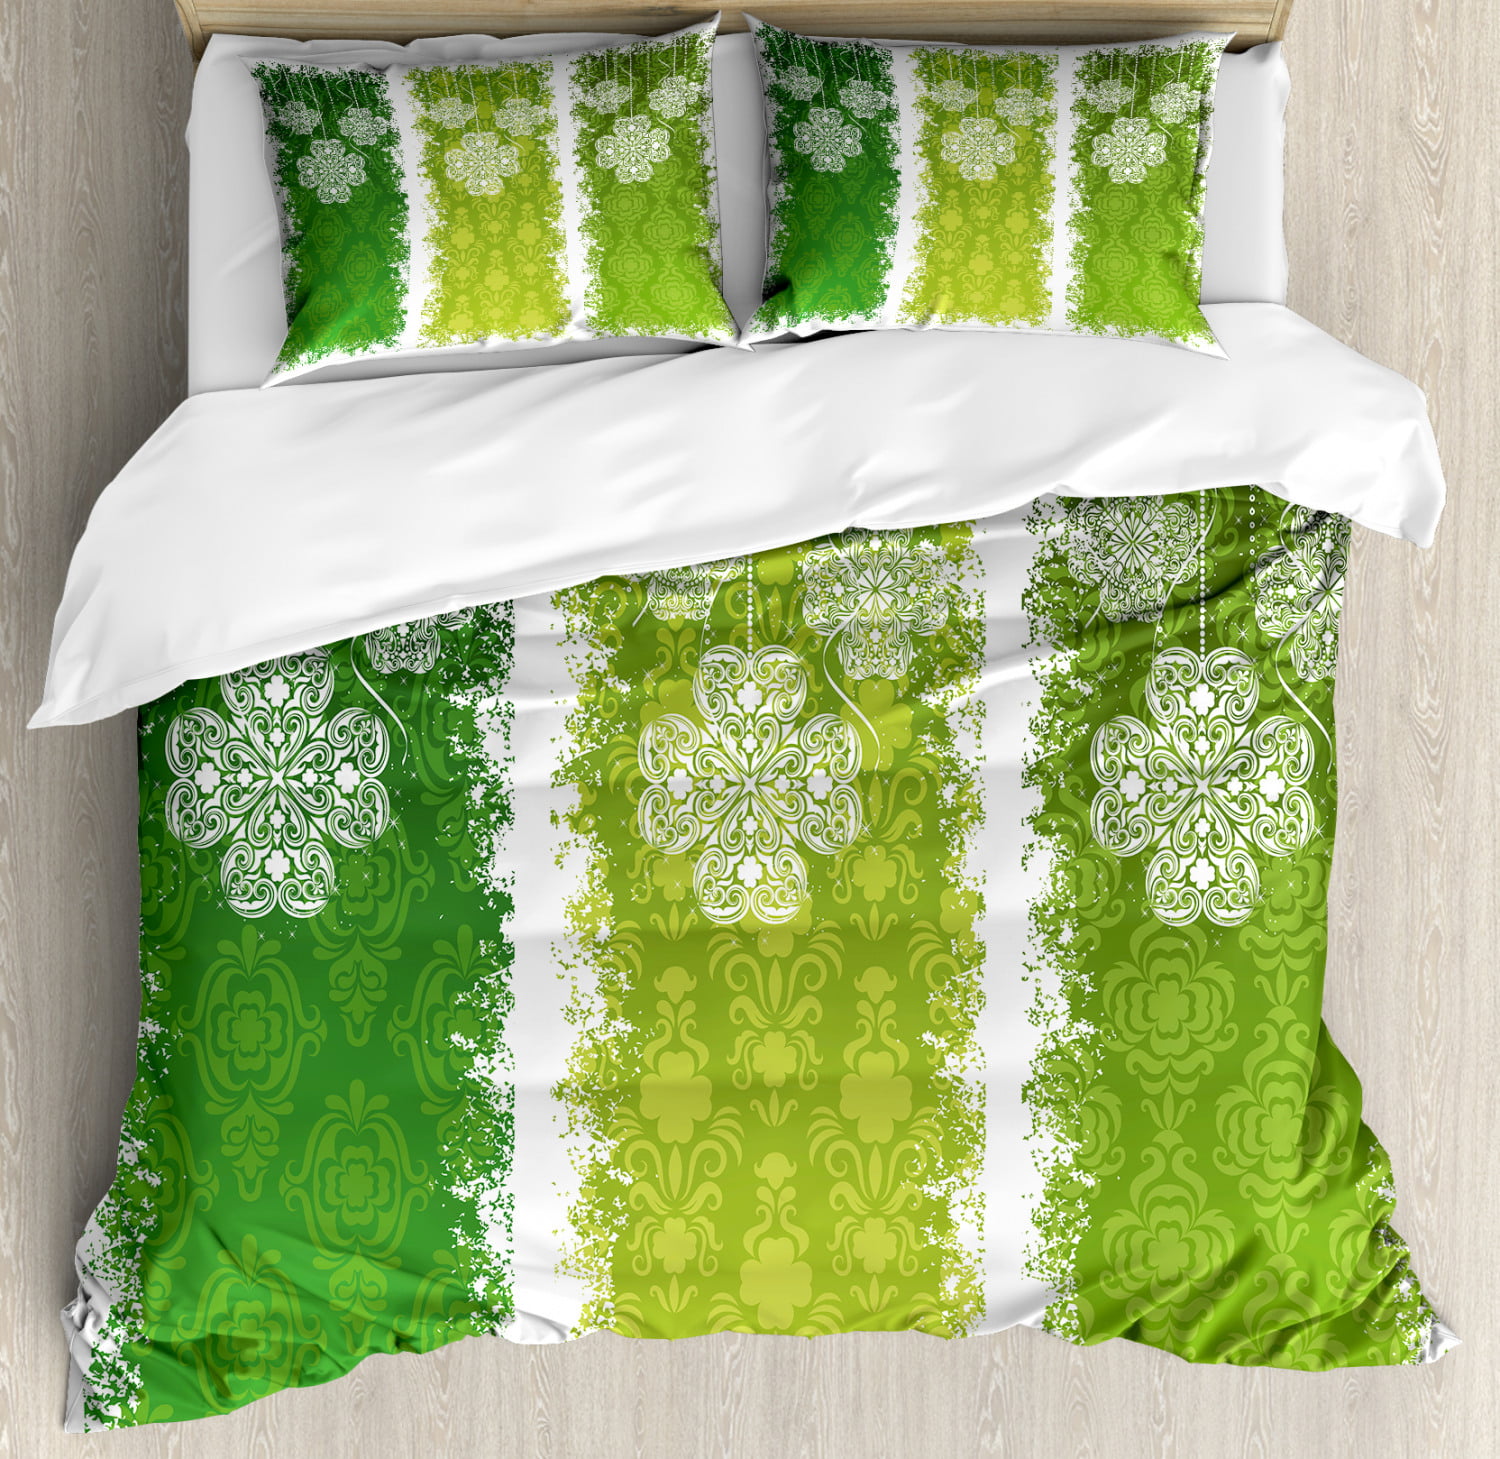 Ambesonne Bamboo Print Duvet Cover Set Lotus Flower Bamboo Background on Stems Tropical Plant Oriental Lime Green Decorative 3 Piece Bedding Set with 2 Pillow Shams King Size 